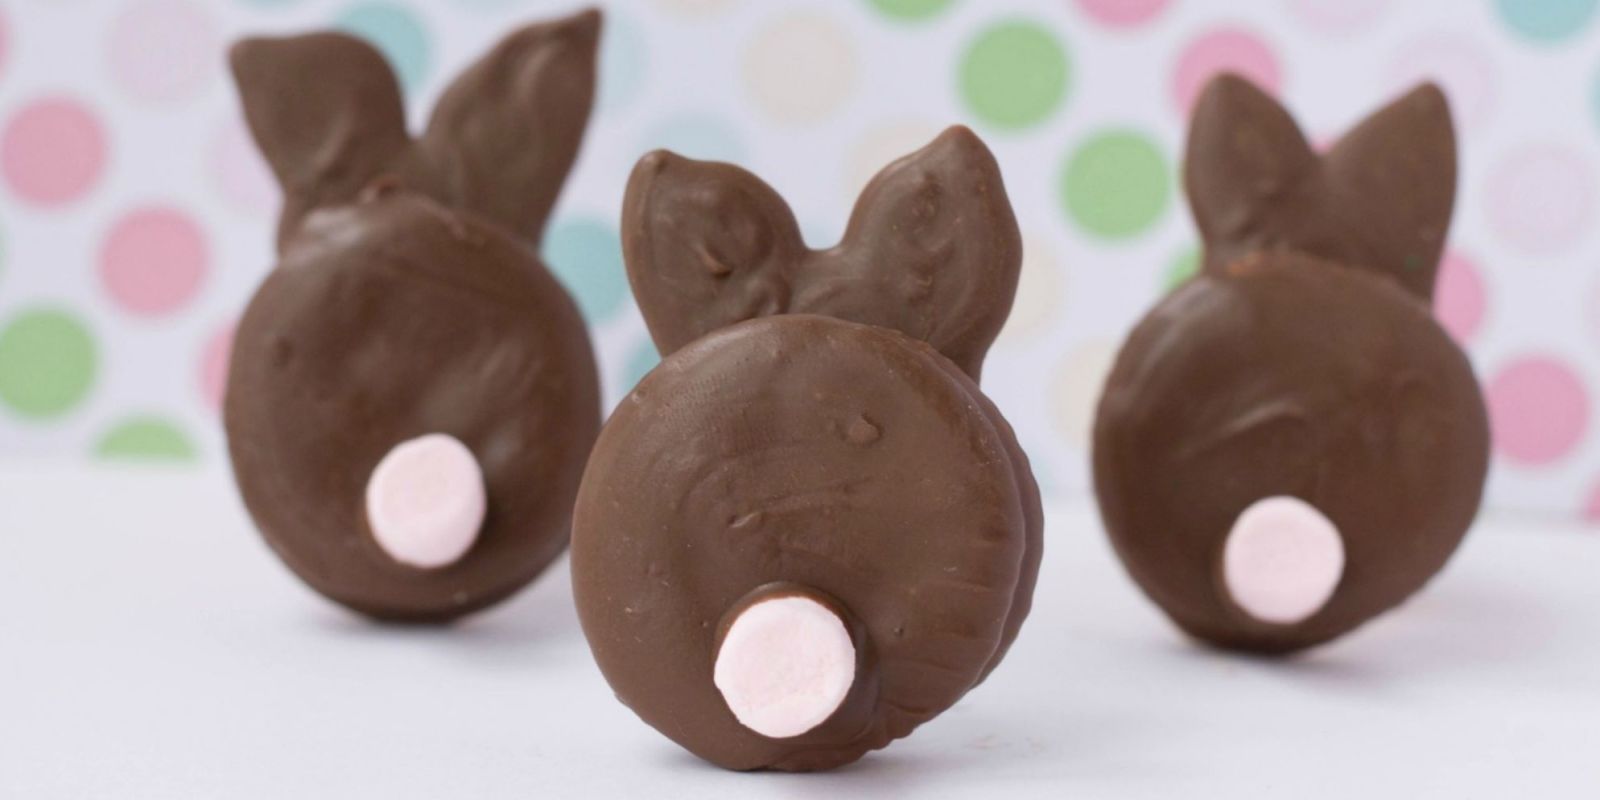 11 Easy Easter Desserts That Are Almost Too Adorable To Eat - Easter Dessert Recipes